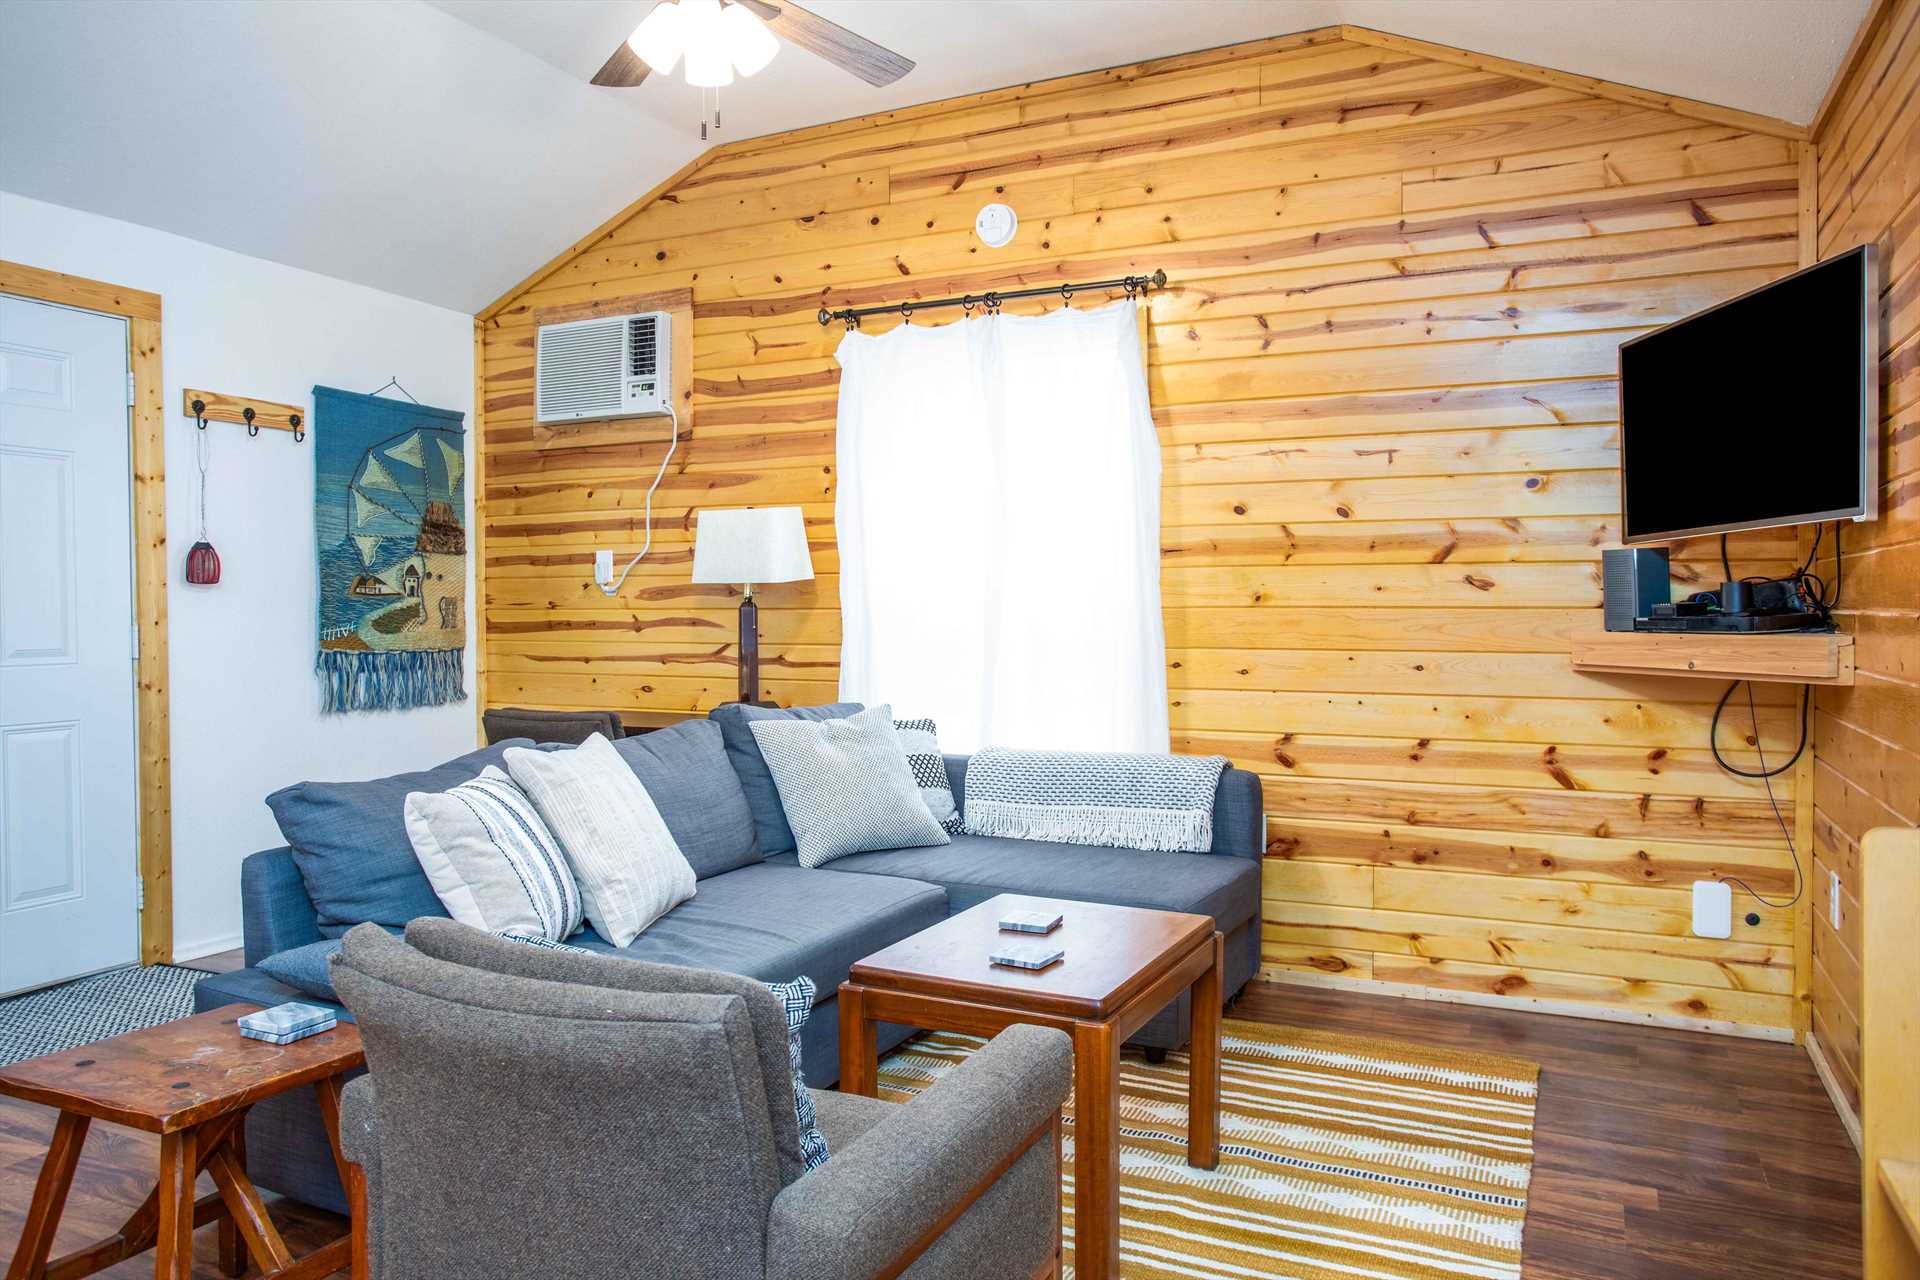                                                 Efficient AC units and ceiling fans keep the cabin at your desired level of comfort, even during Texas summers!